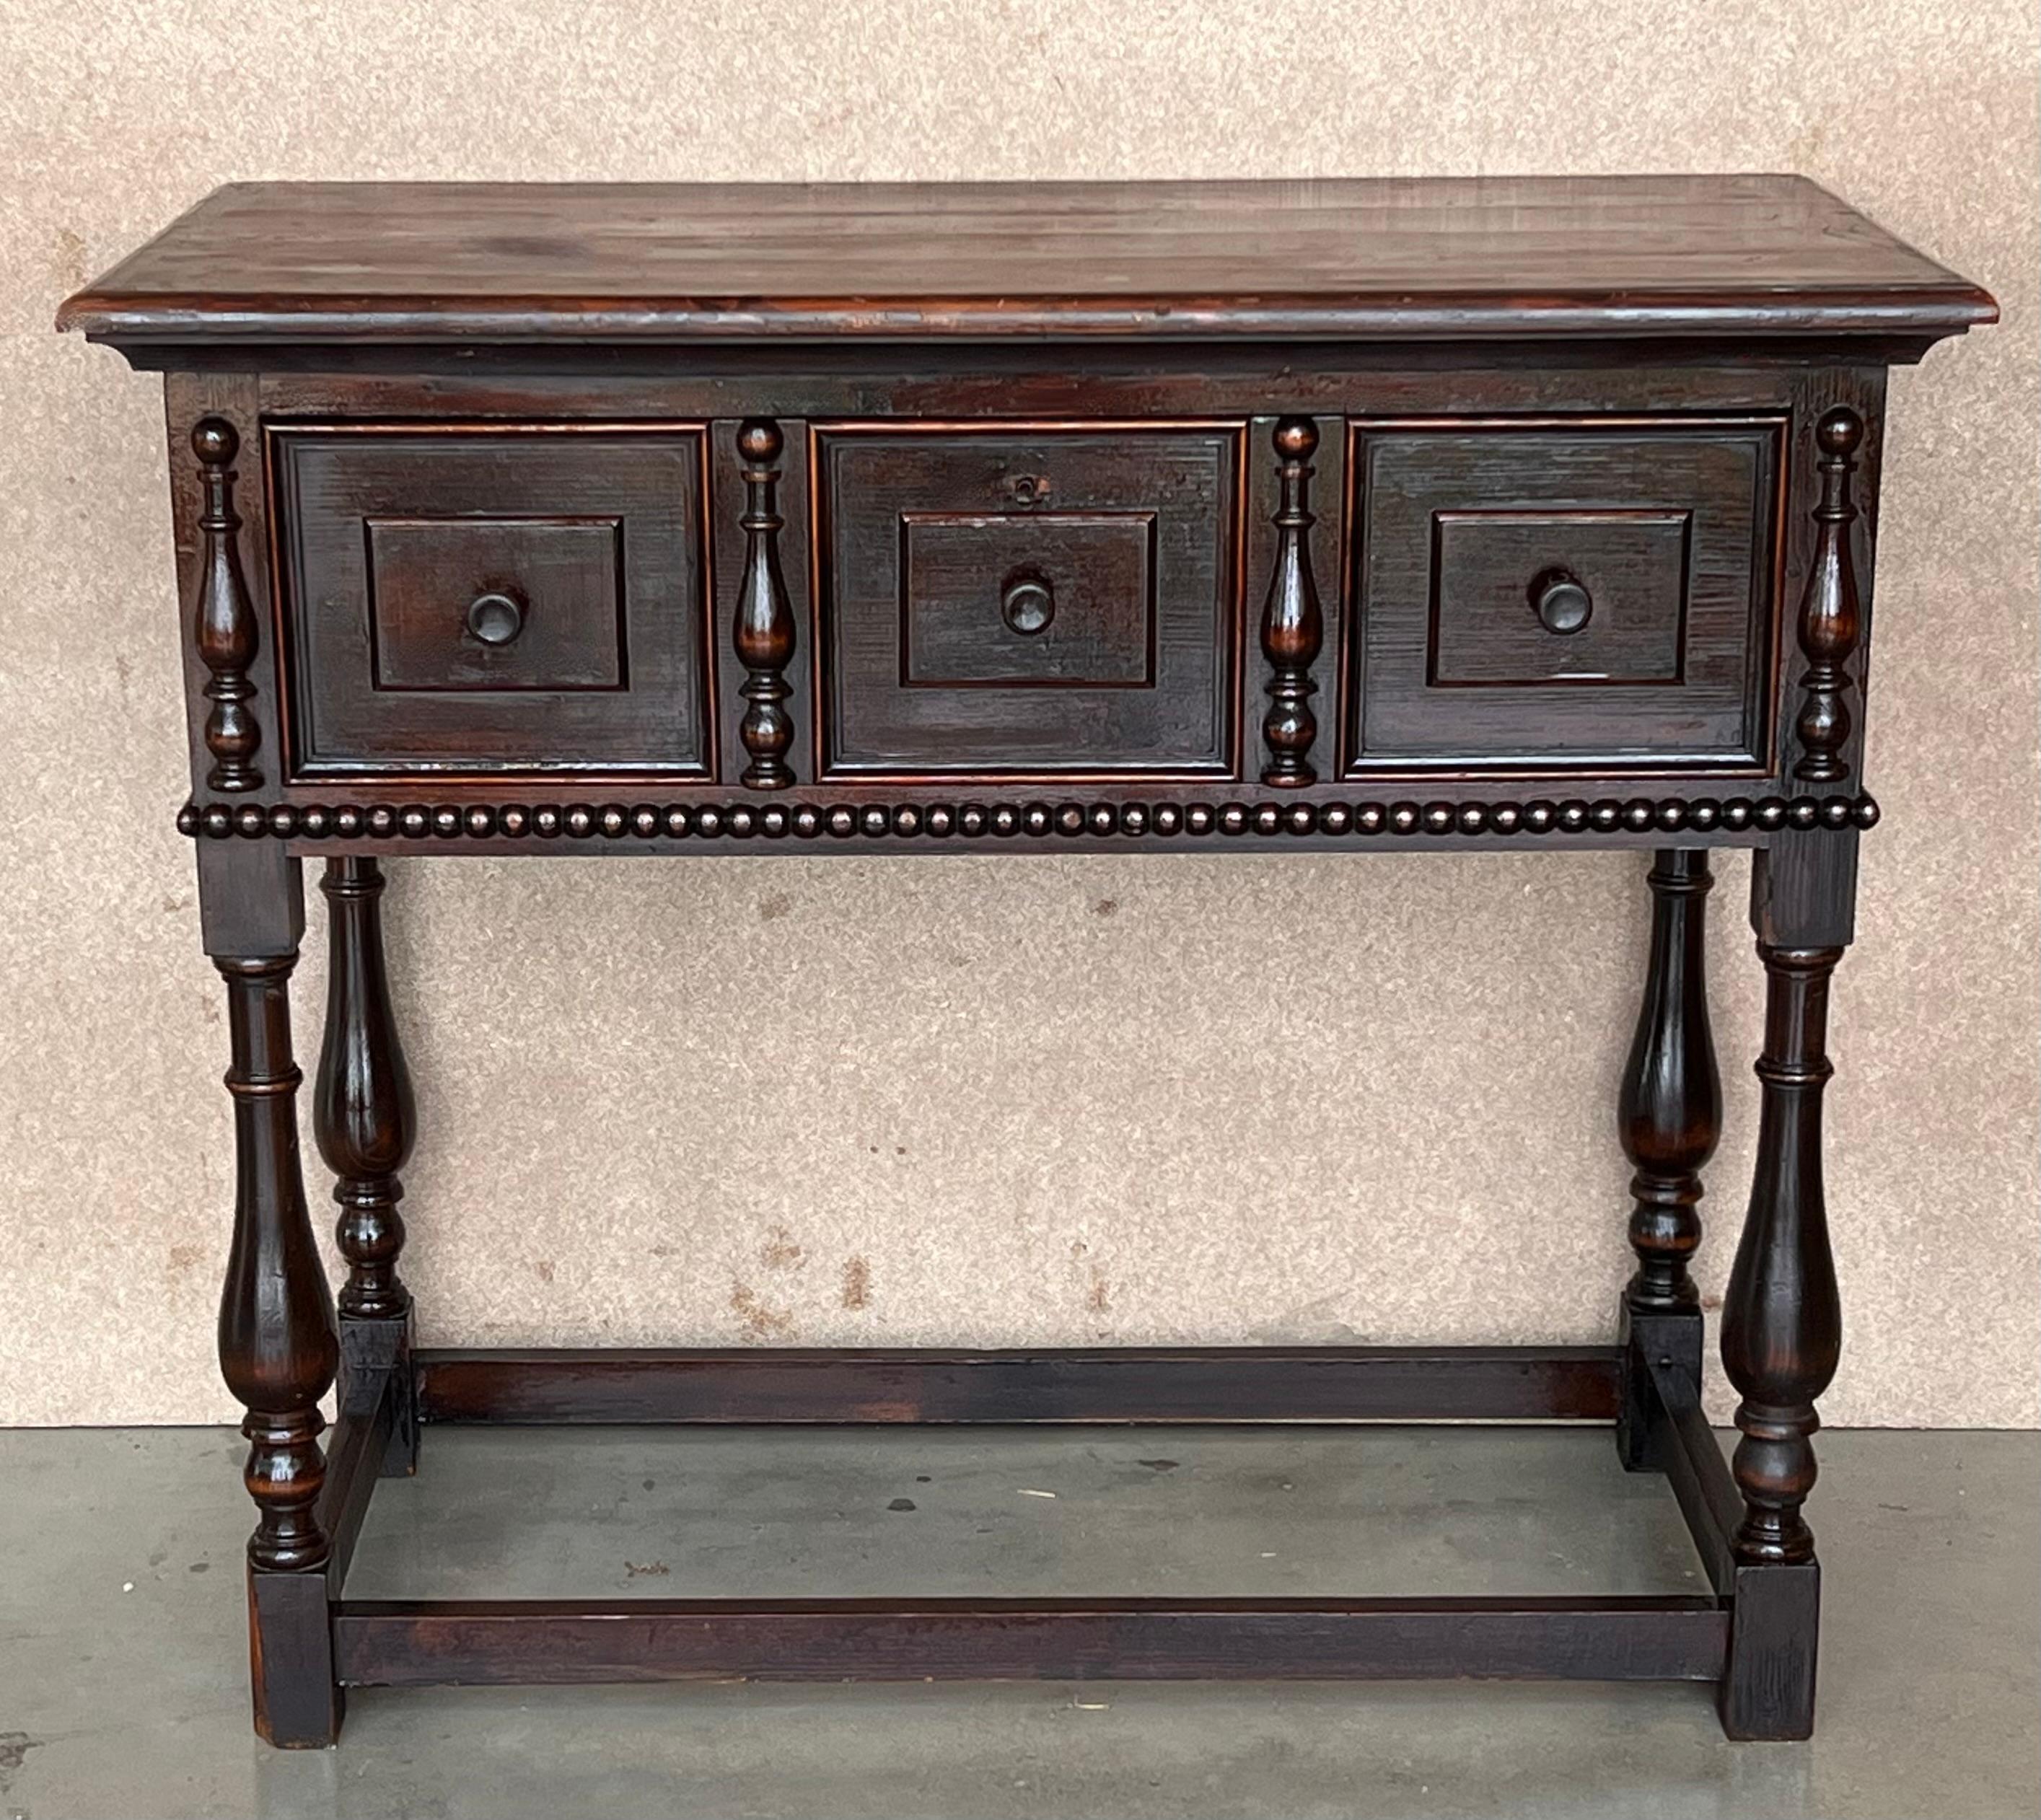 This large Spanish late 19th century features a beautiful one plank rectangular top over a carved drawer featuring slightly different hardware, is adorned with geometrical motifs and columns with their original handmade drop pulls
The apron is